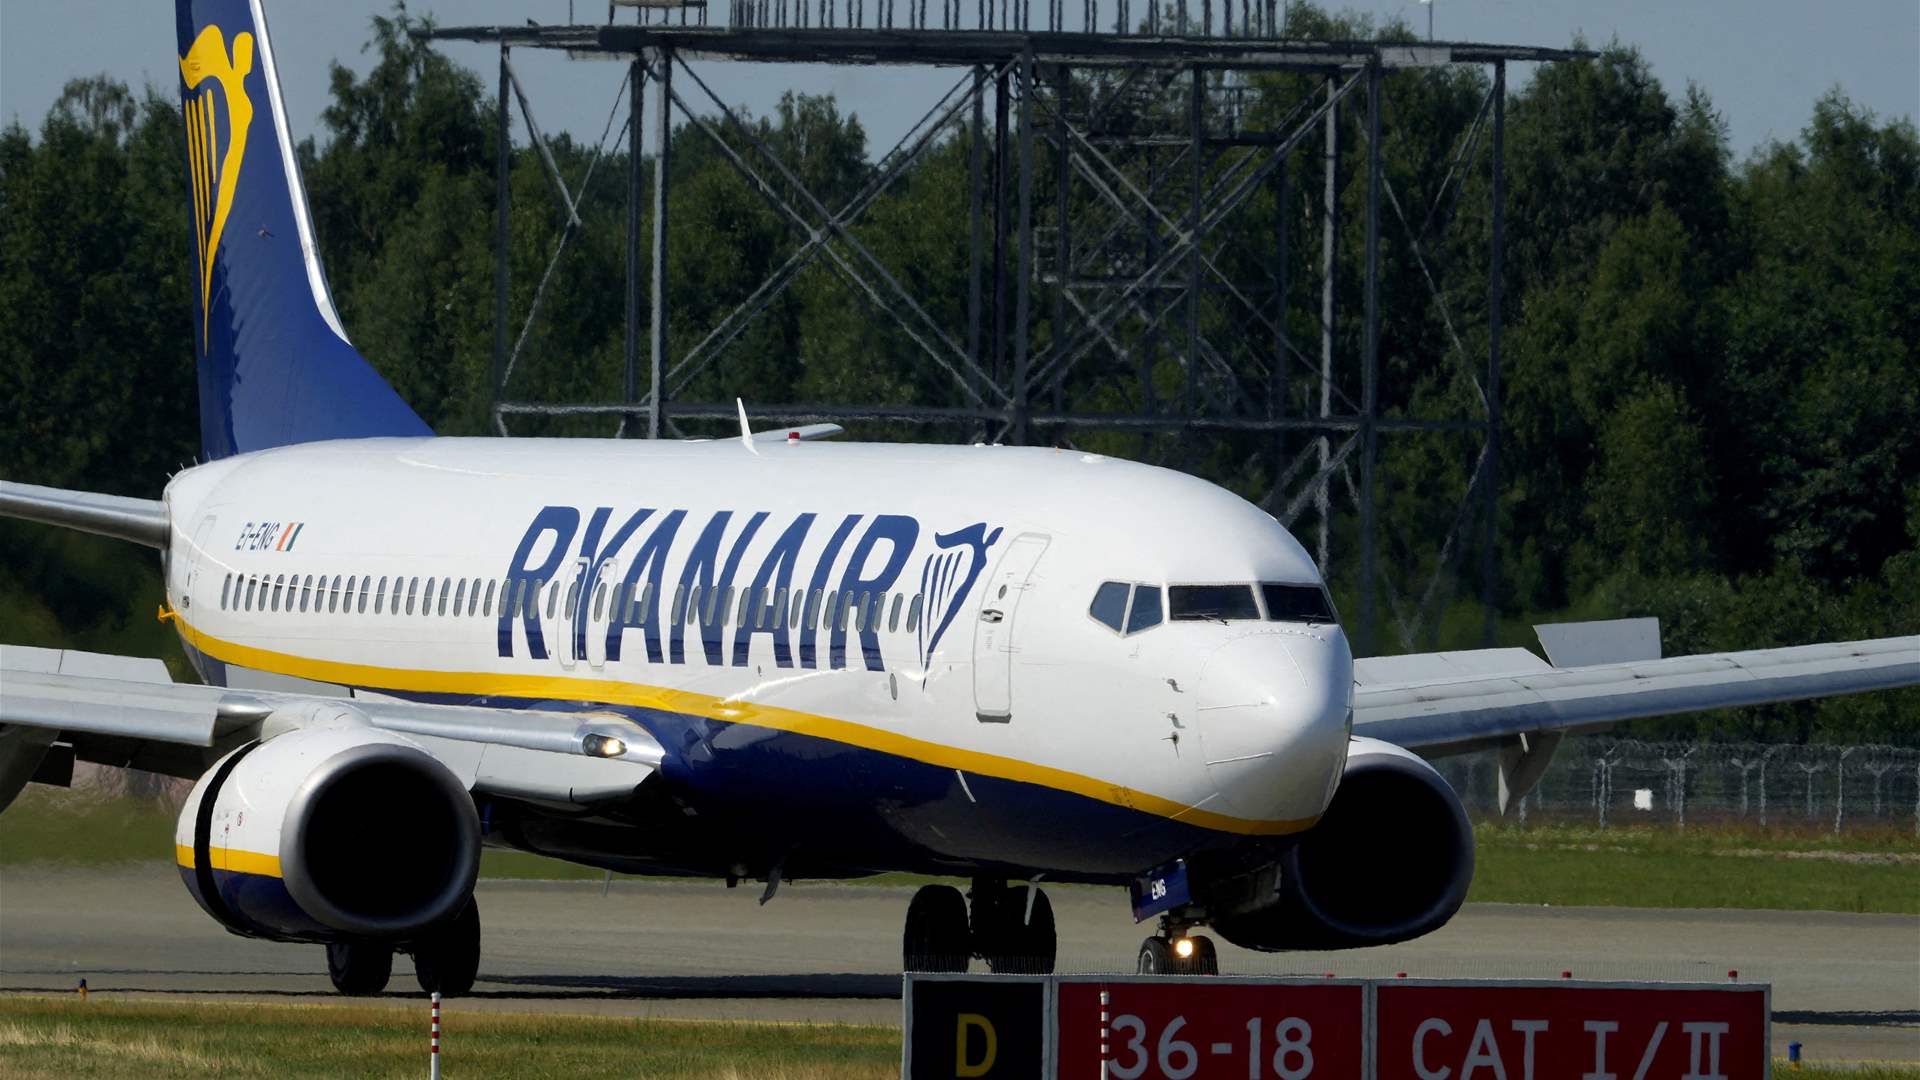 Ryanair: Resumption of flights to and from Tel Aviv as of June 3